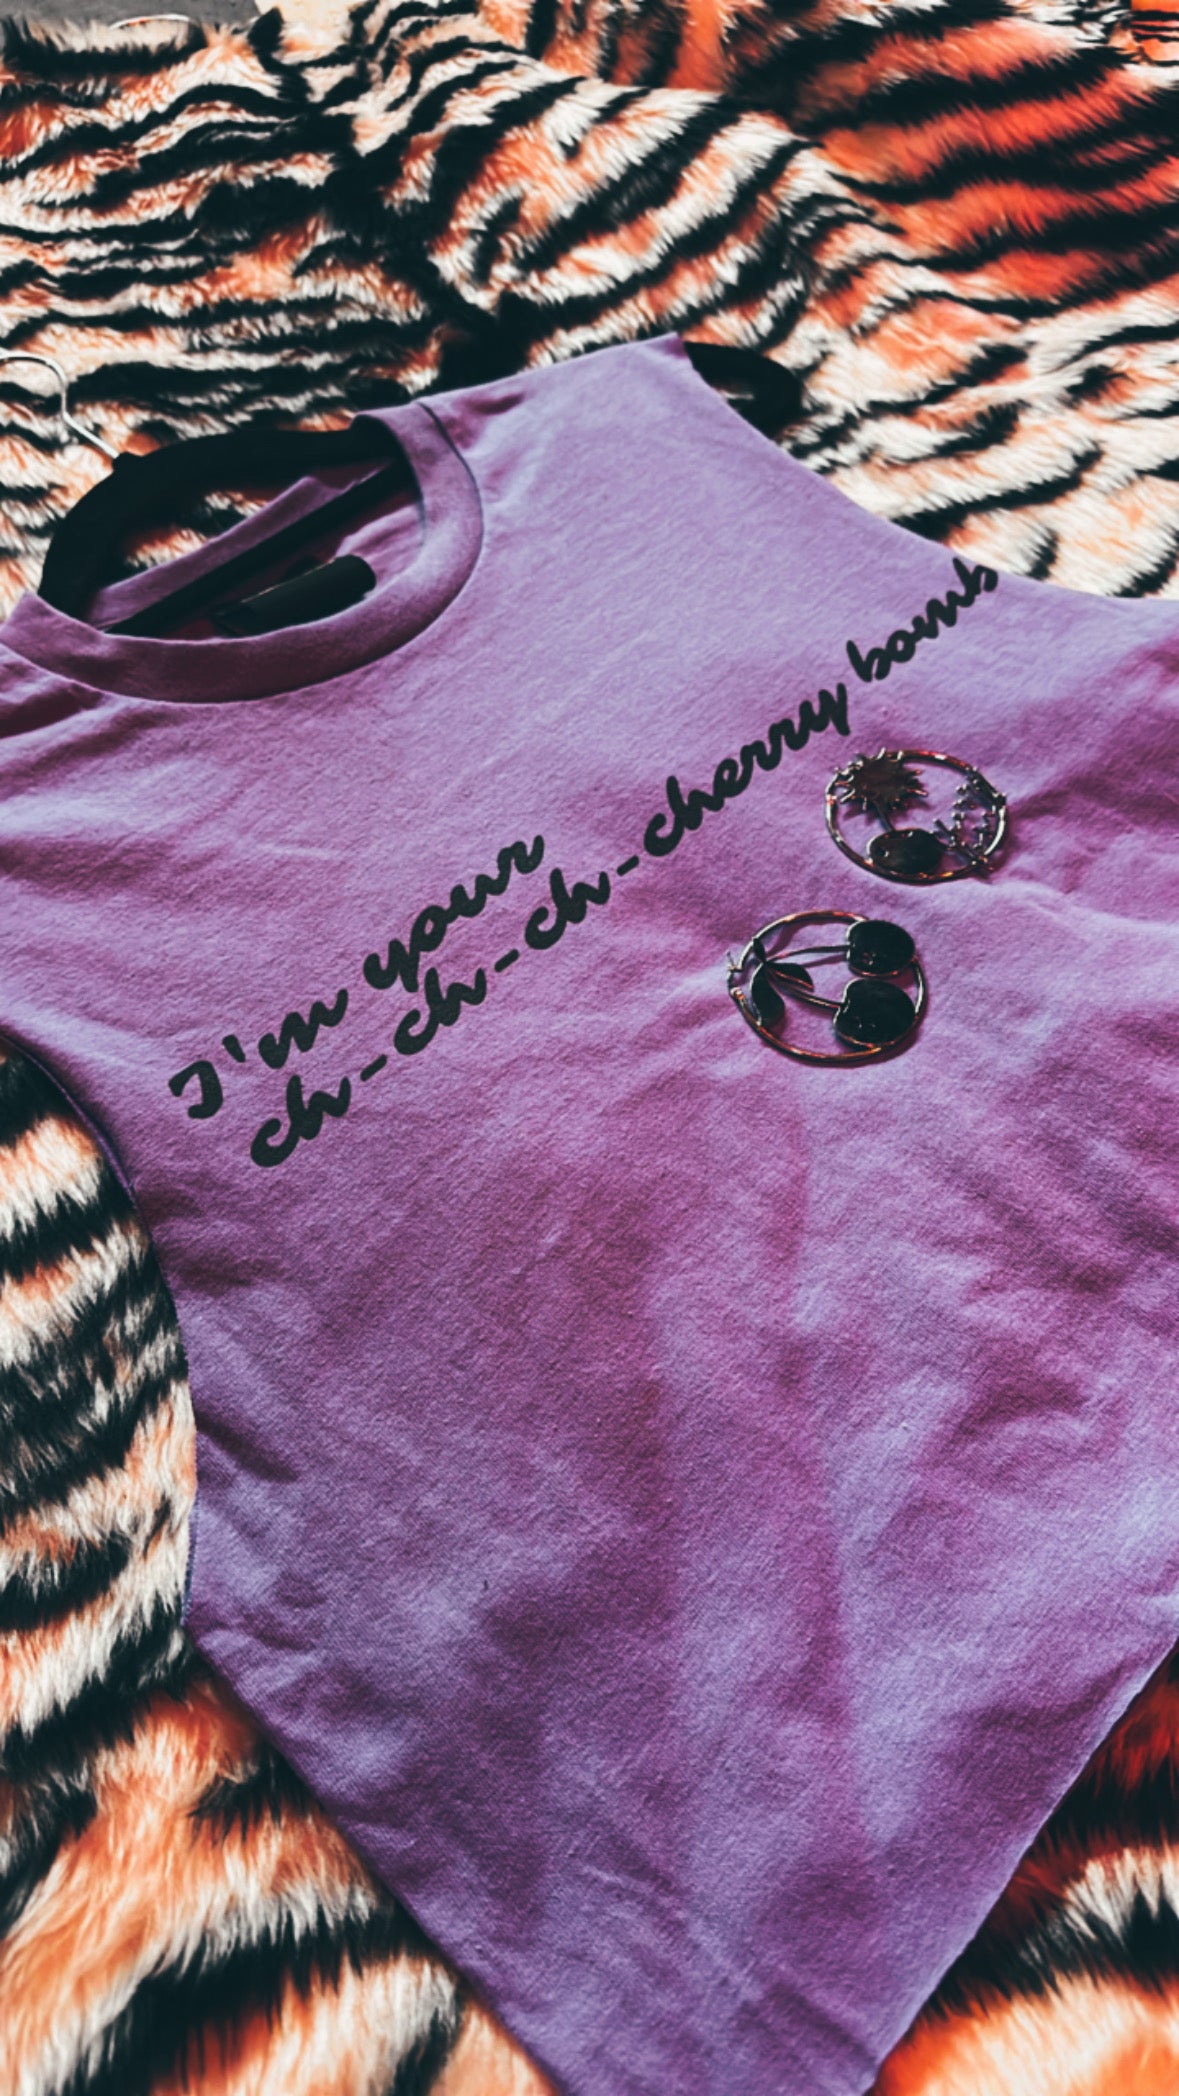 “I’M YOUR CHERRY BOMB” CROPPED TANK TOP